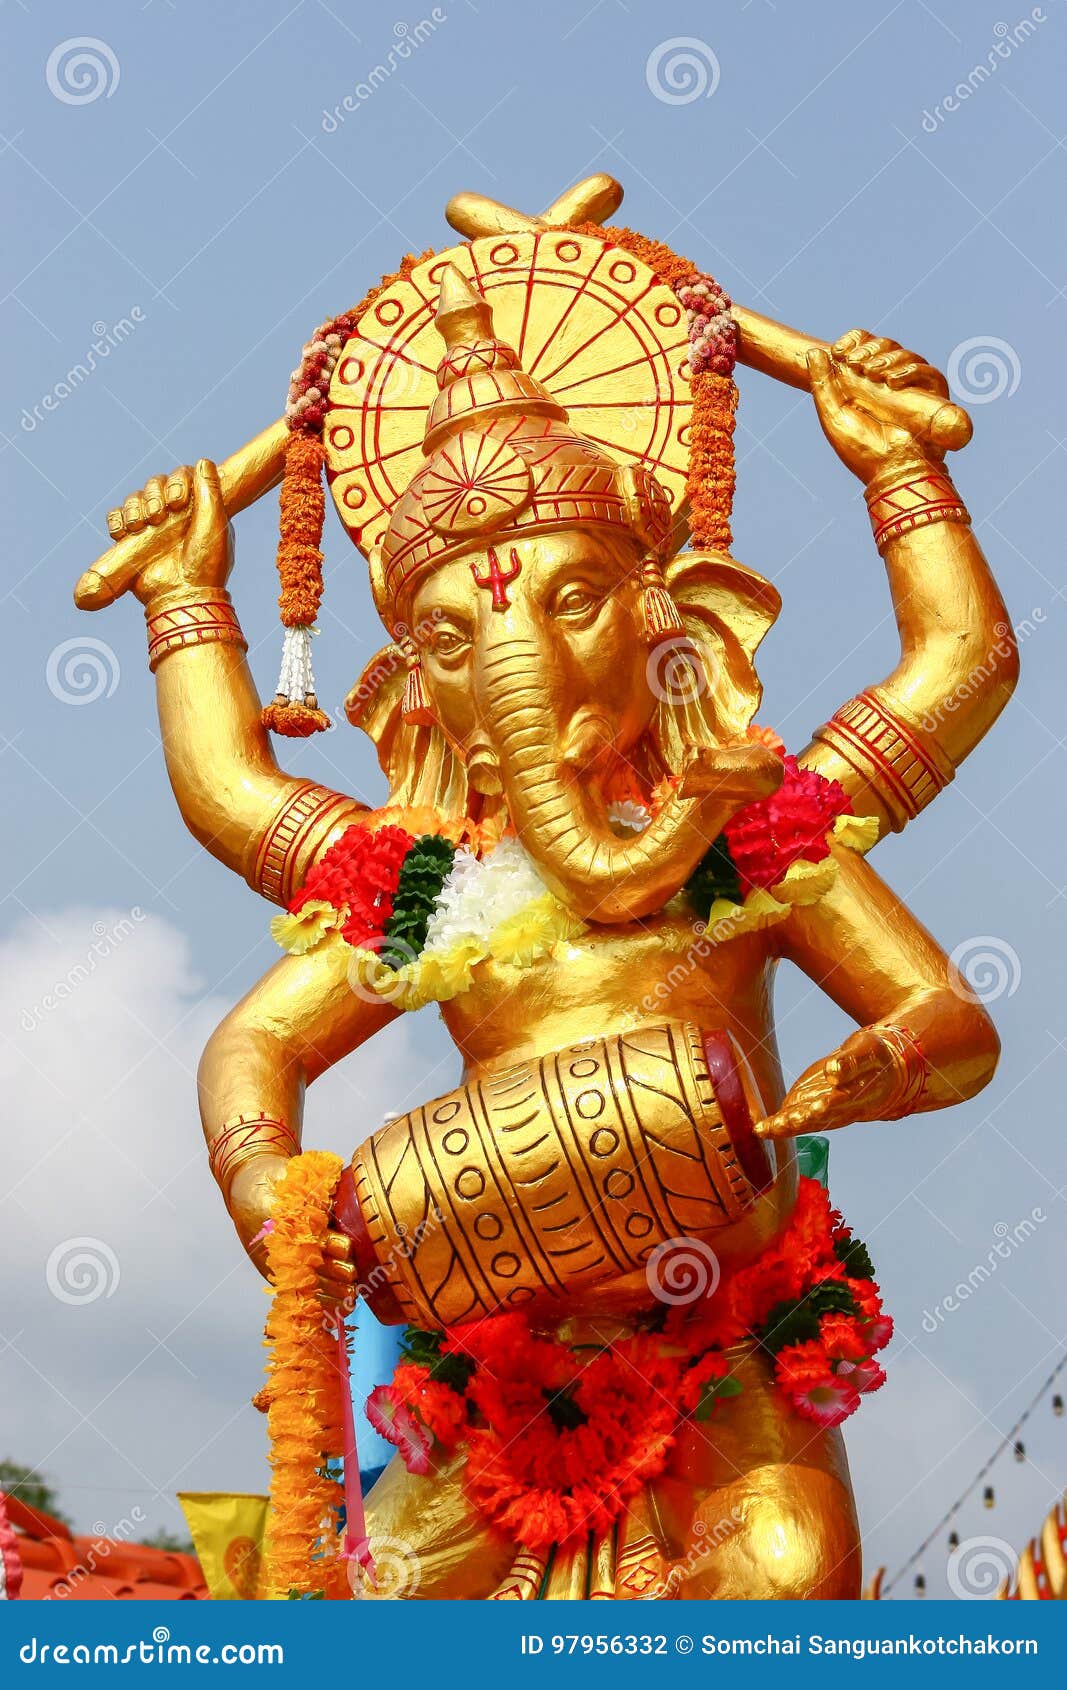 Golden Ganesha, Lord of Success, Statue Stock Photo - Image of festival ...